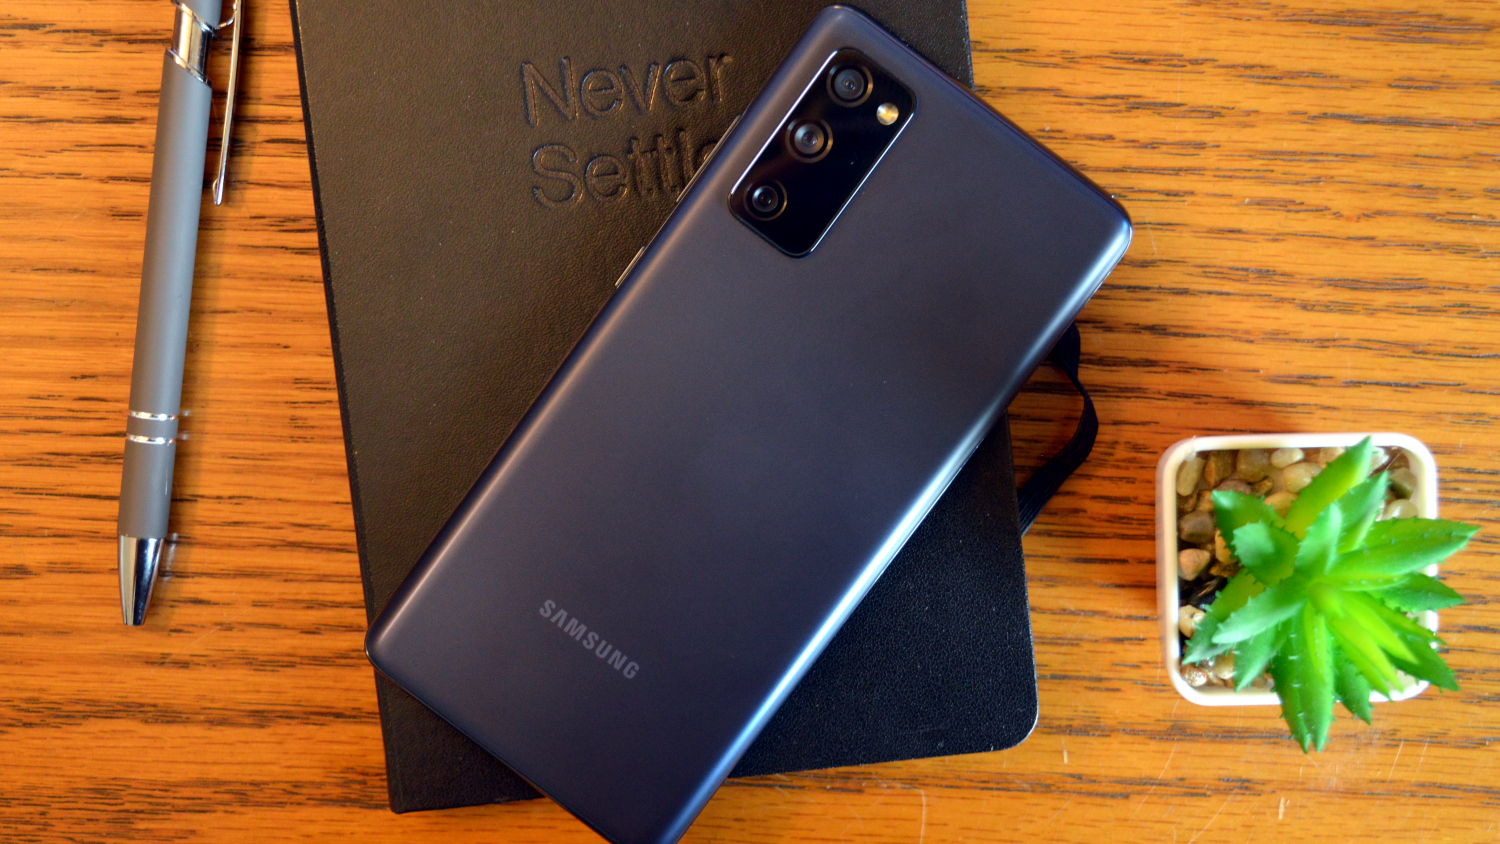 Samsung Galaxy S20 FE review: A solid budget buy